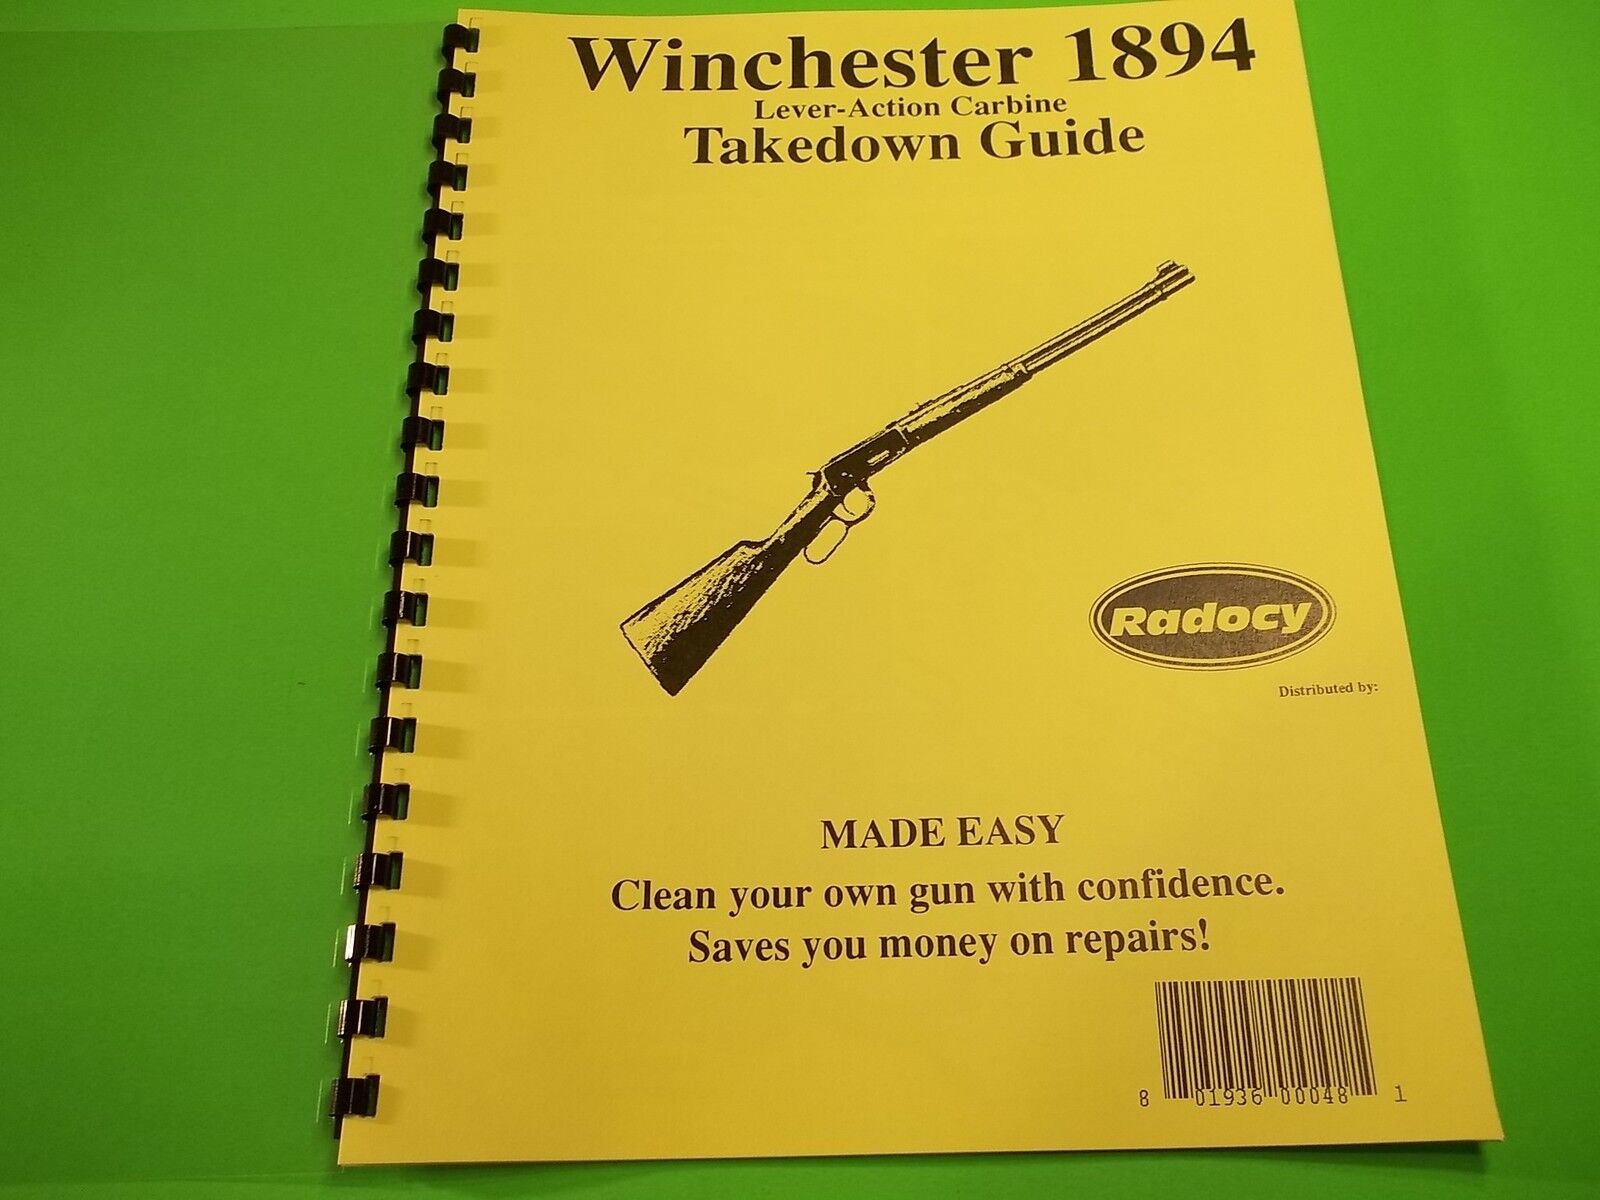 TAKEDOWN MANUAL GUIDE for Winchester LEVER ACTION 1894 Carbine, Legendary 94